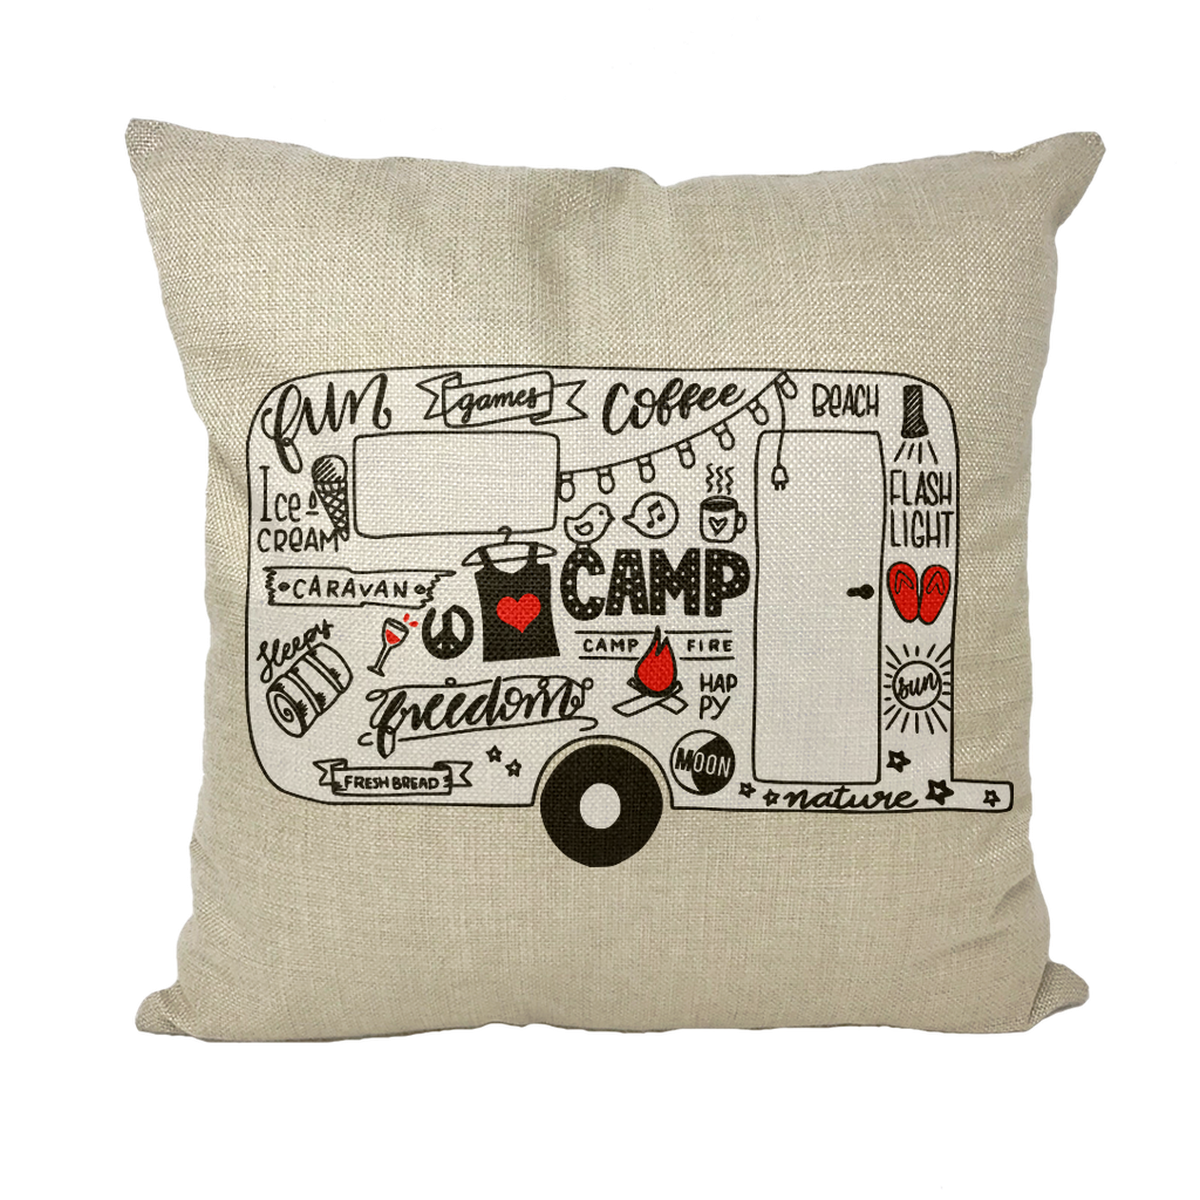 Camping Throw Pillow with Insert